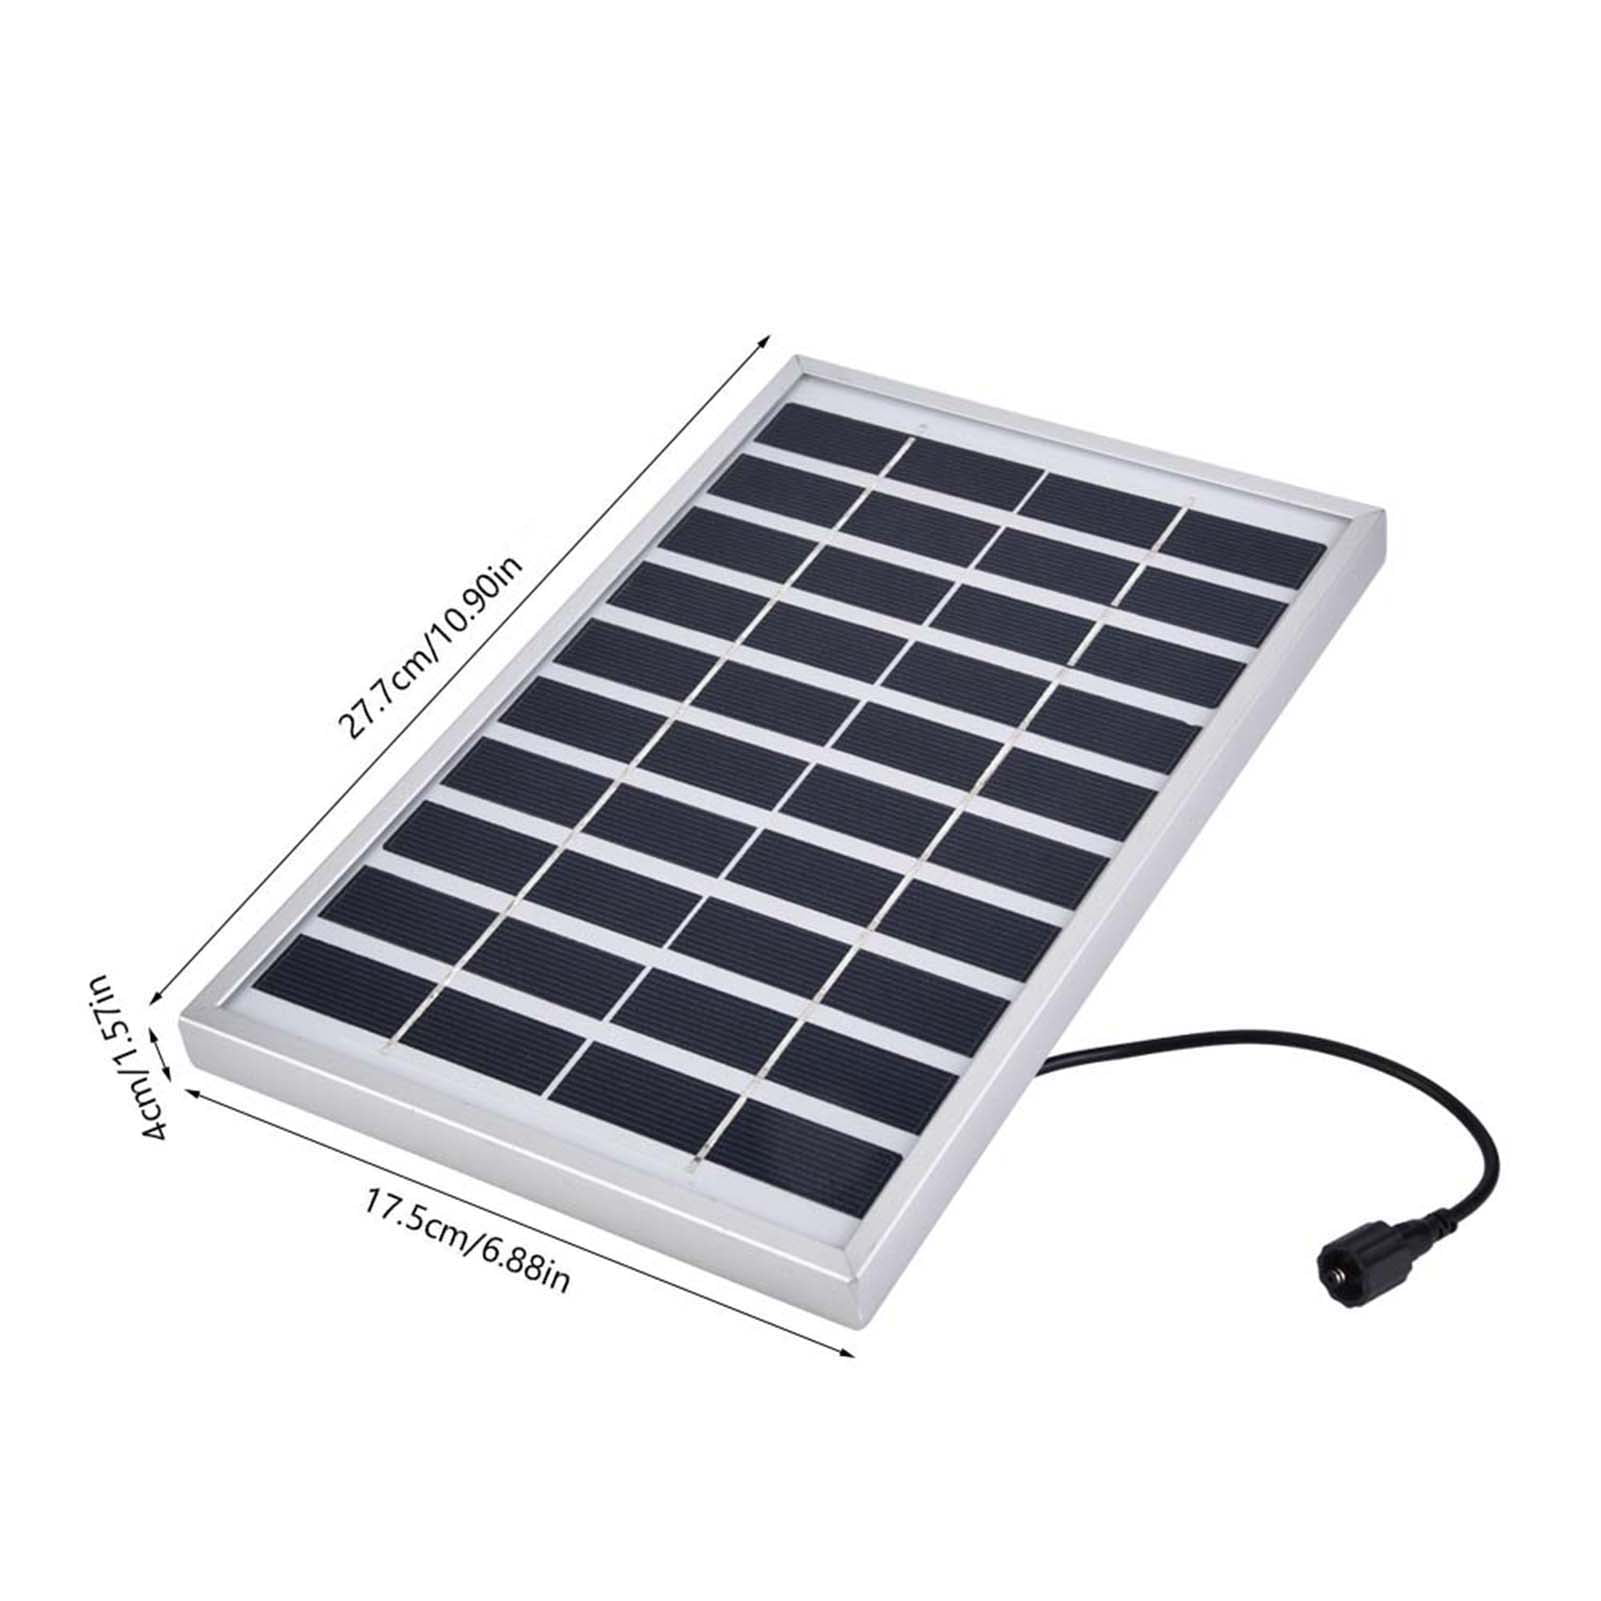 6 Nozzles Solar Powered Fountai Details about   3.5W Solar Fountain with 1500mAh Battery Backup 